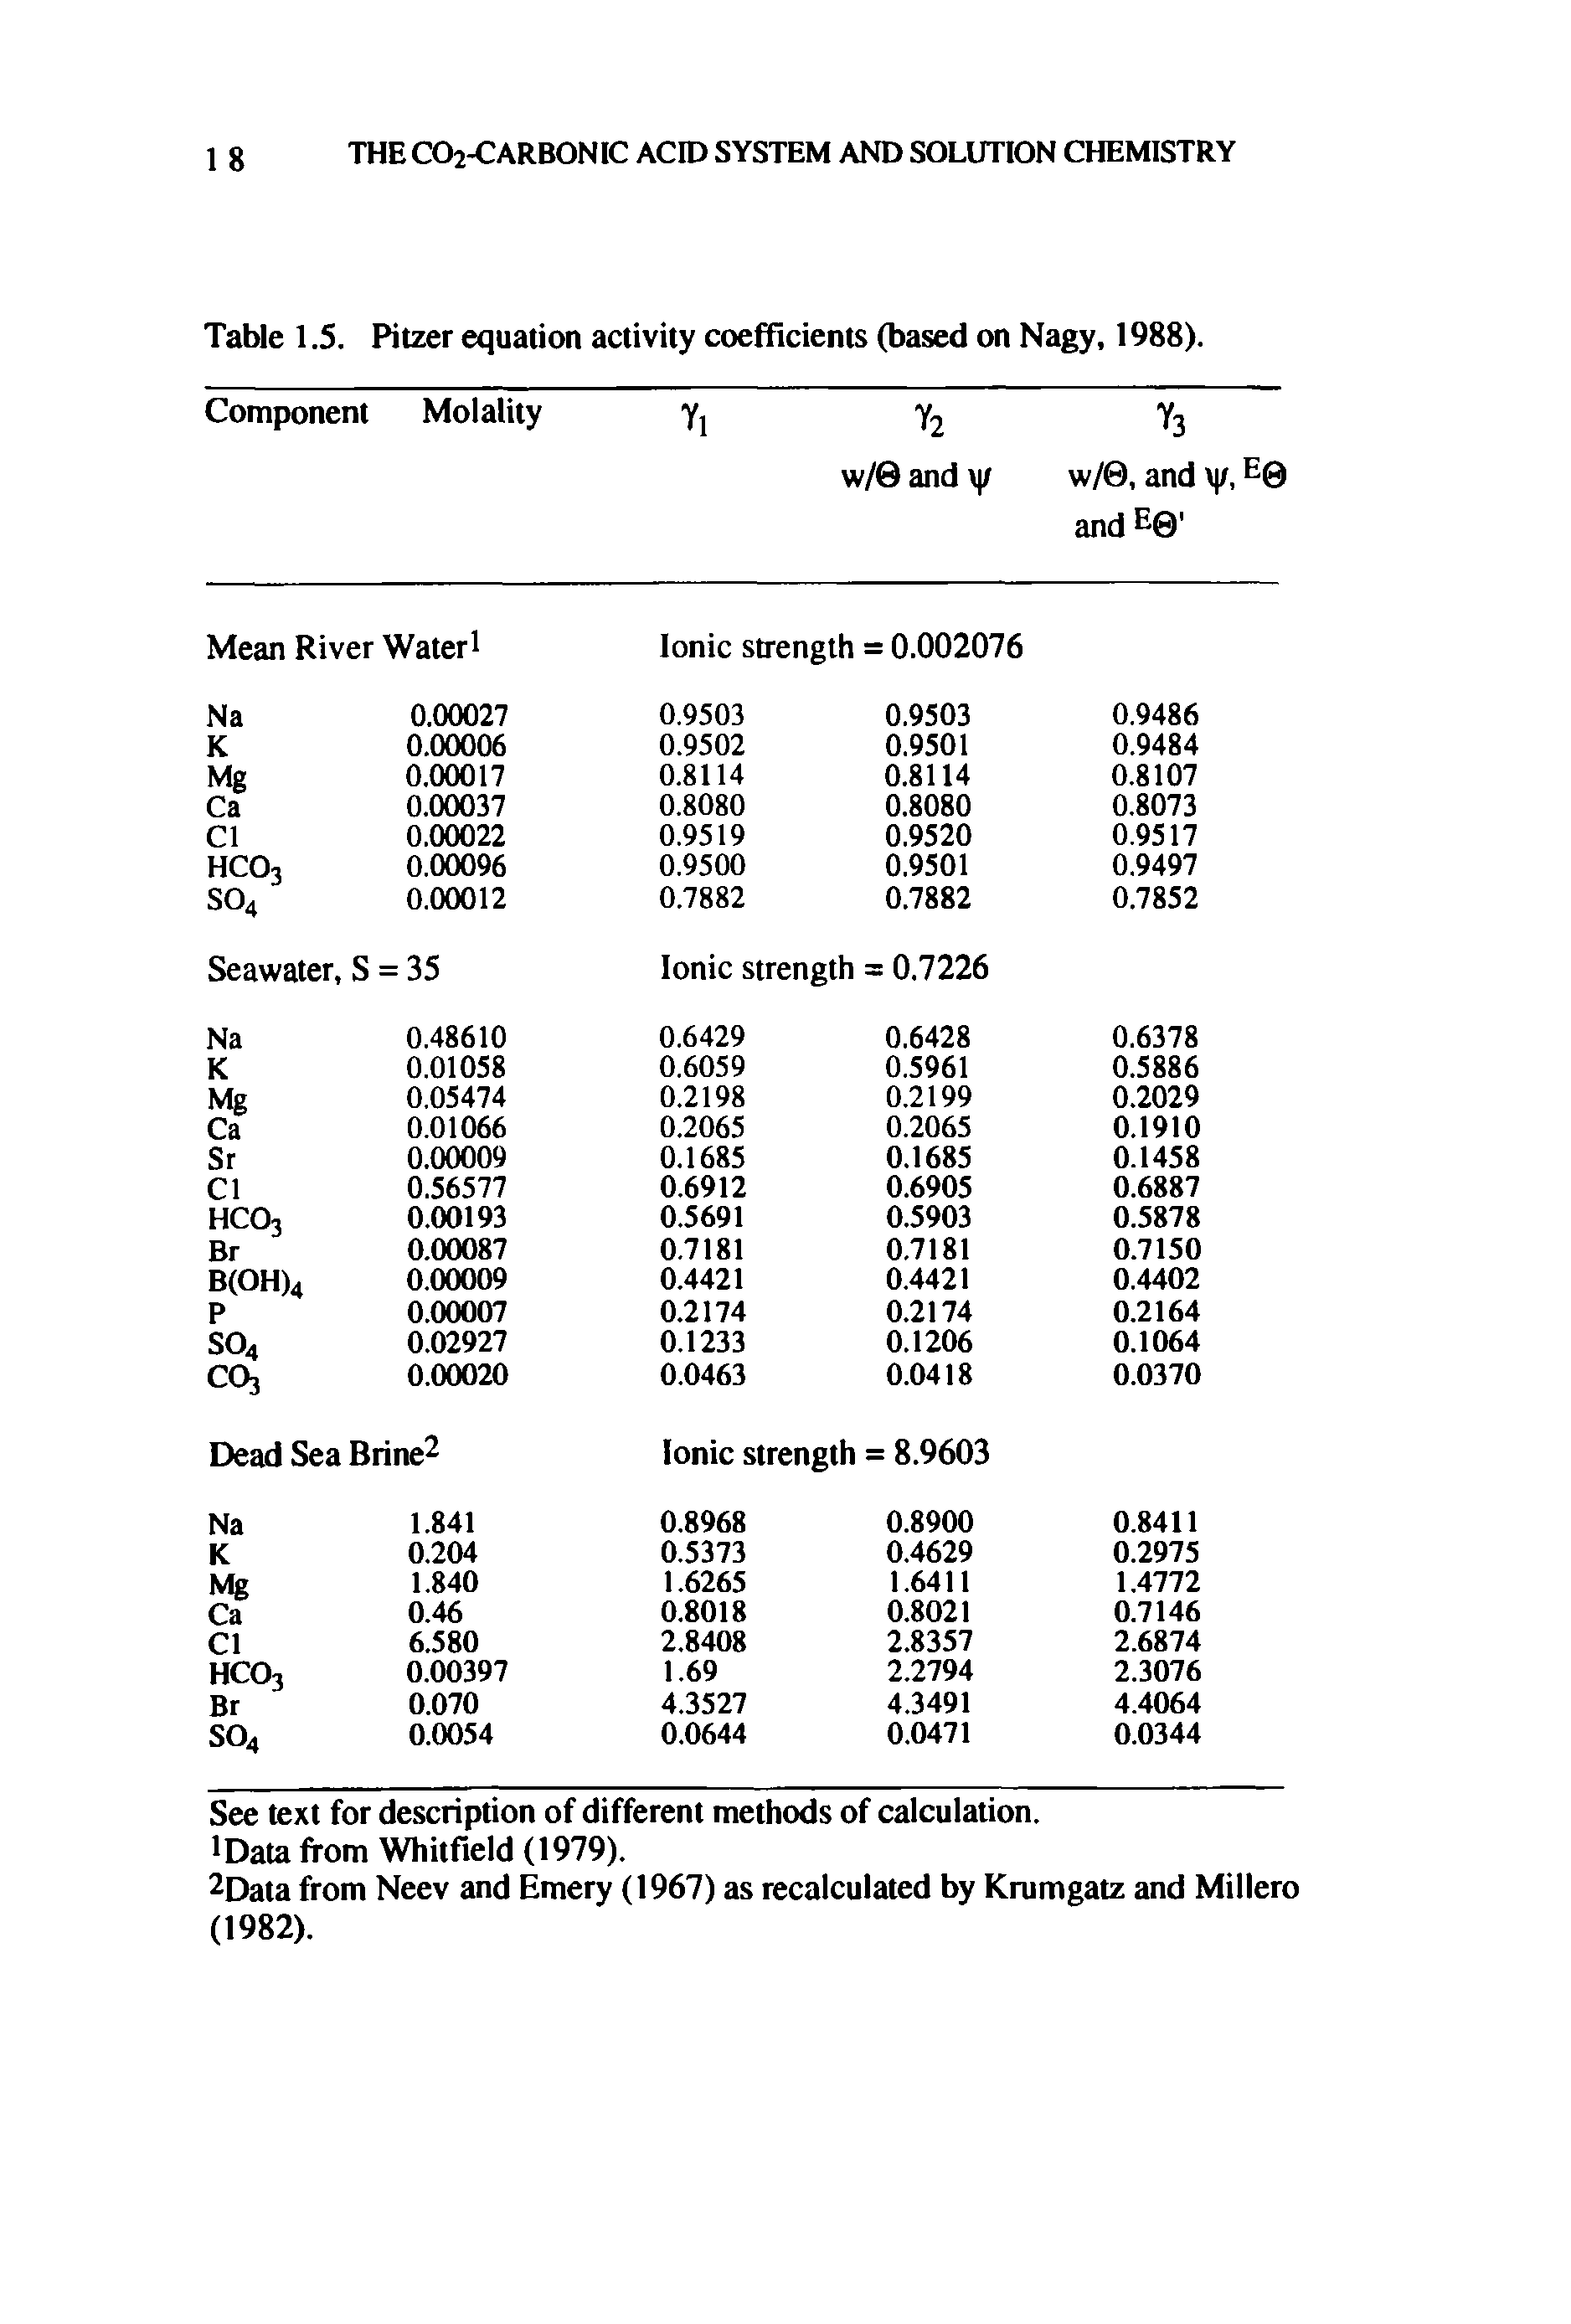 Table 1.5. Pitzer equation activity coefficients (based on Nagy, 1988).